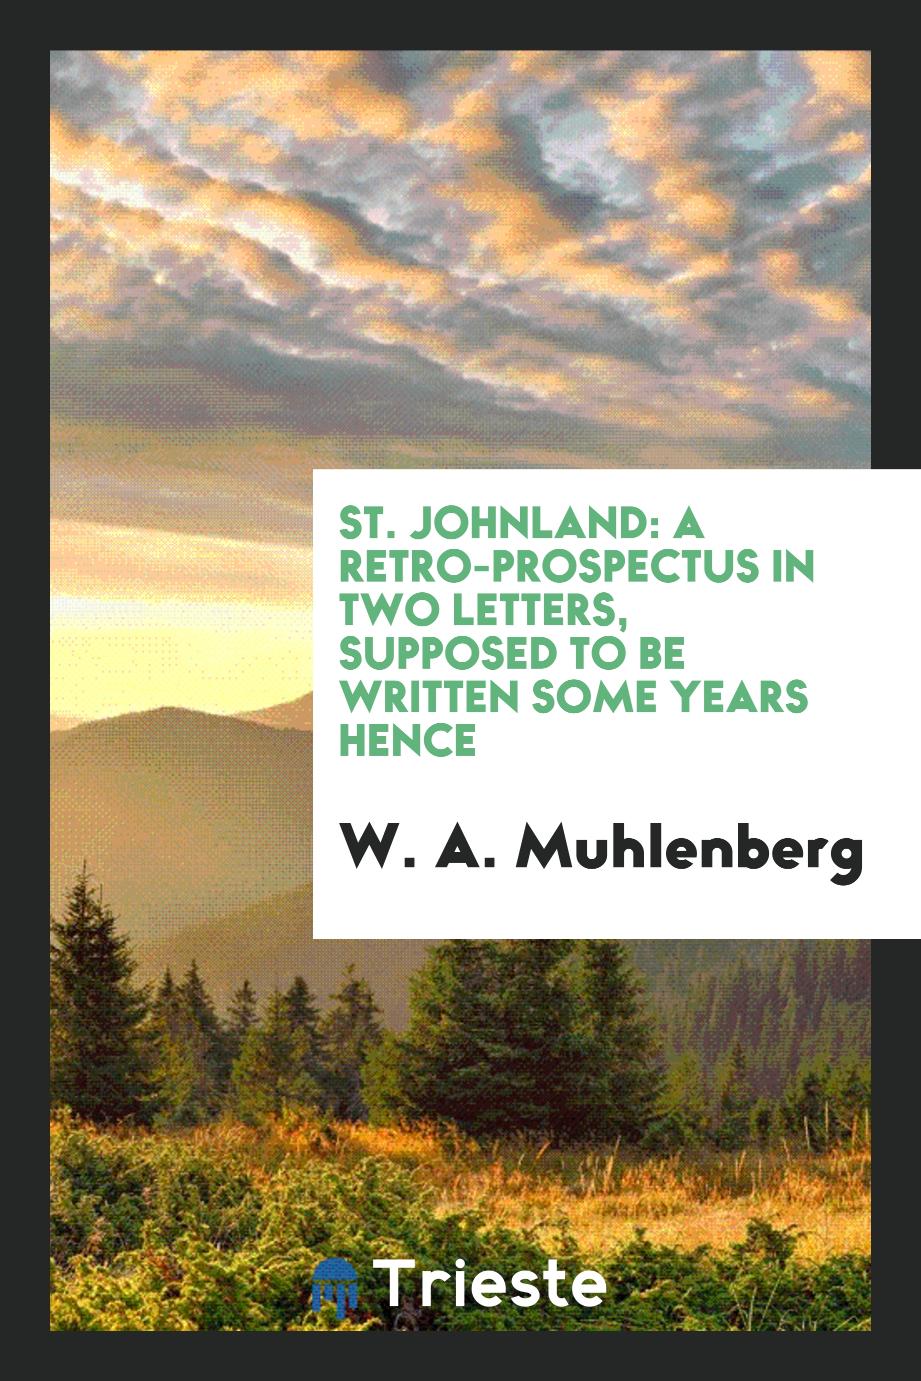 St. Johnland: A Retro-prospectus in Two Letters, Supposed to be Written Some Years Hence